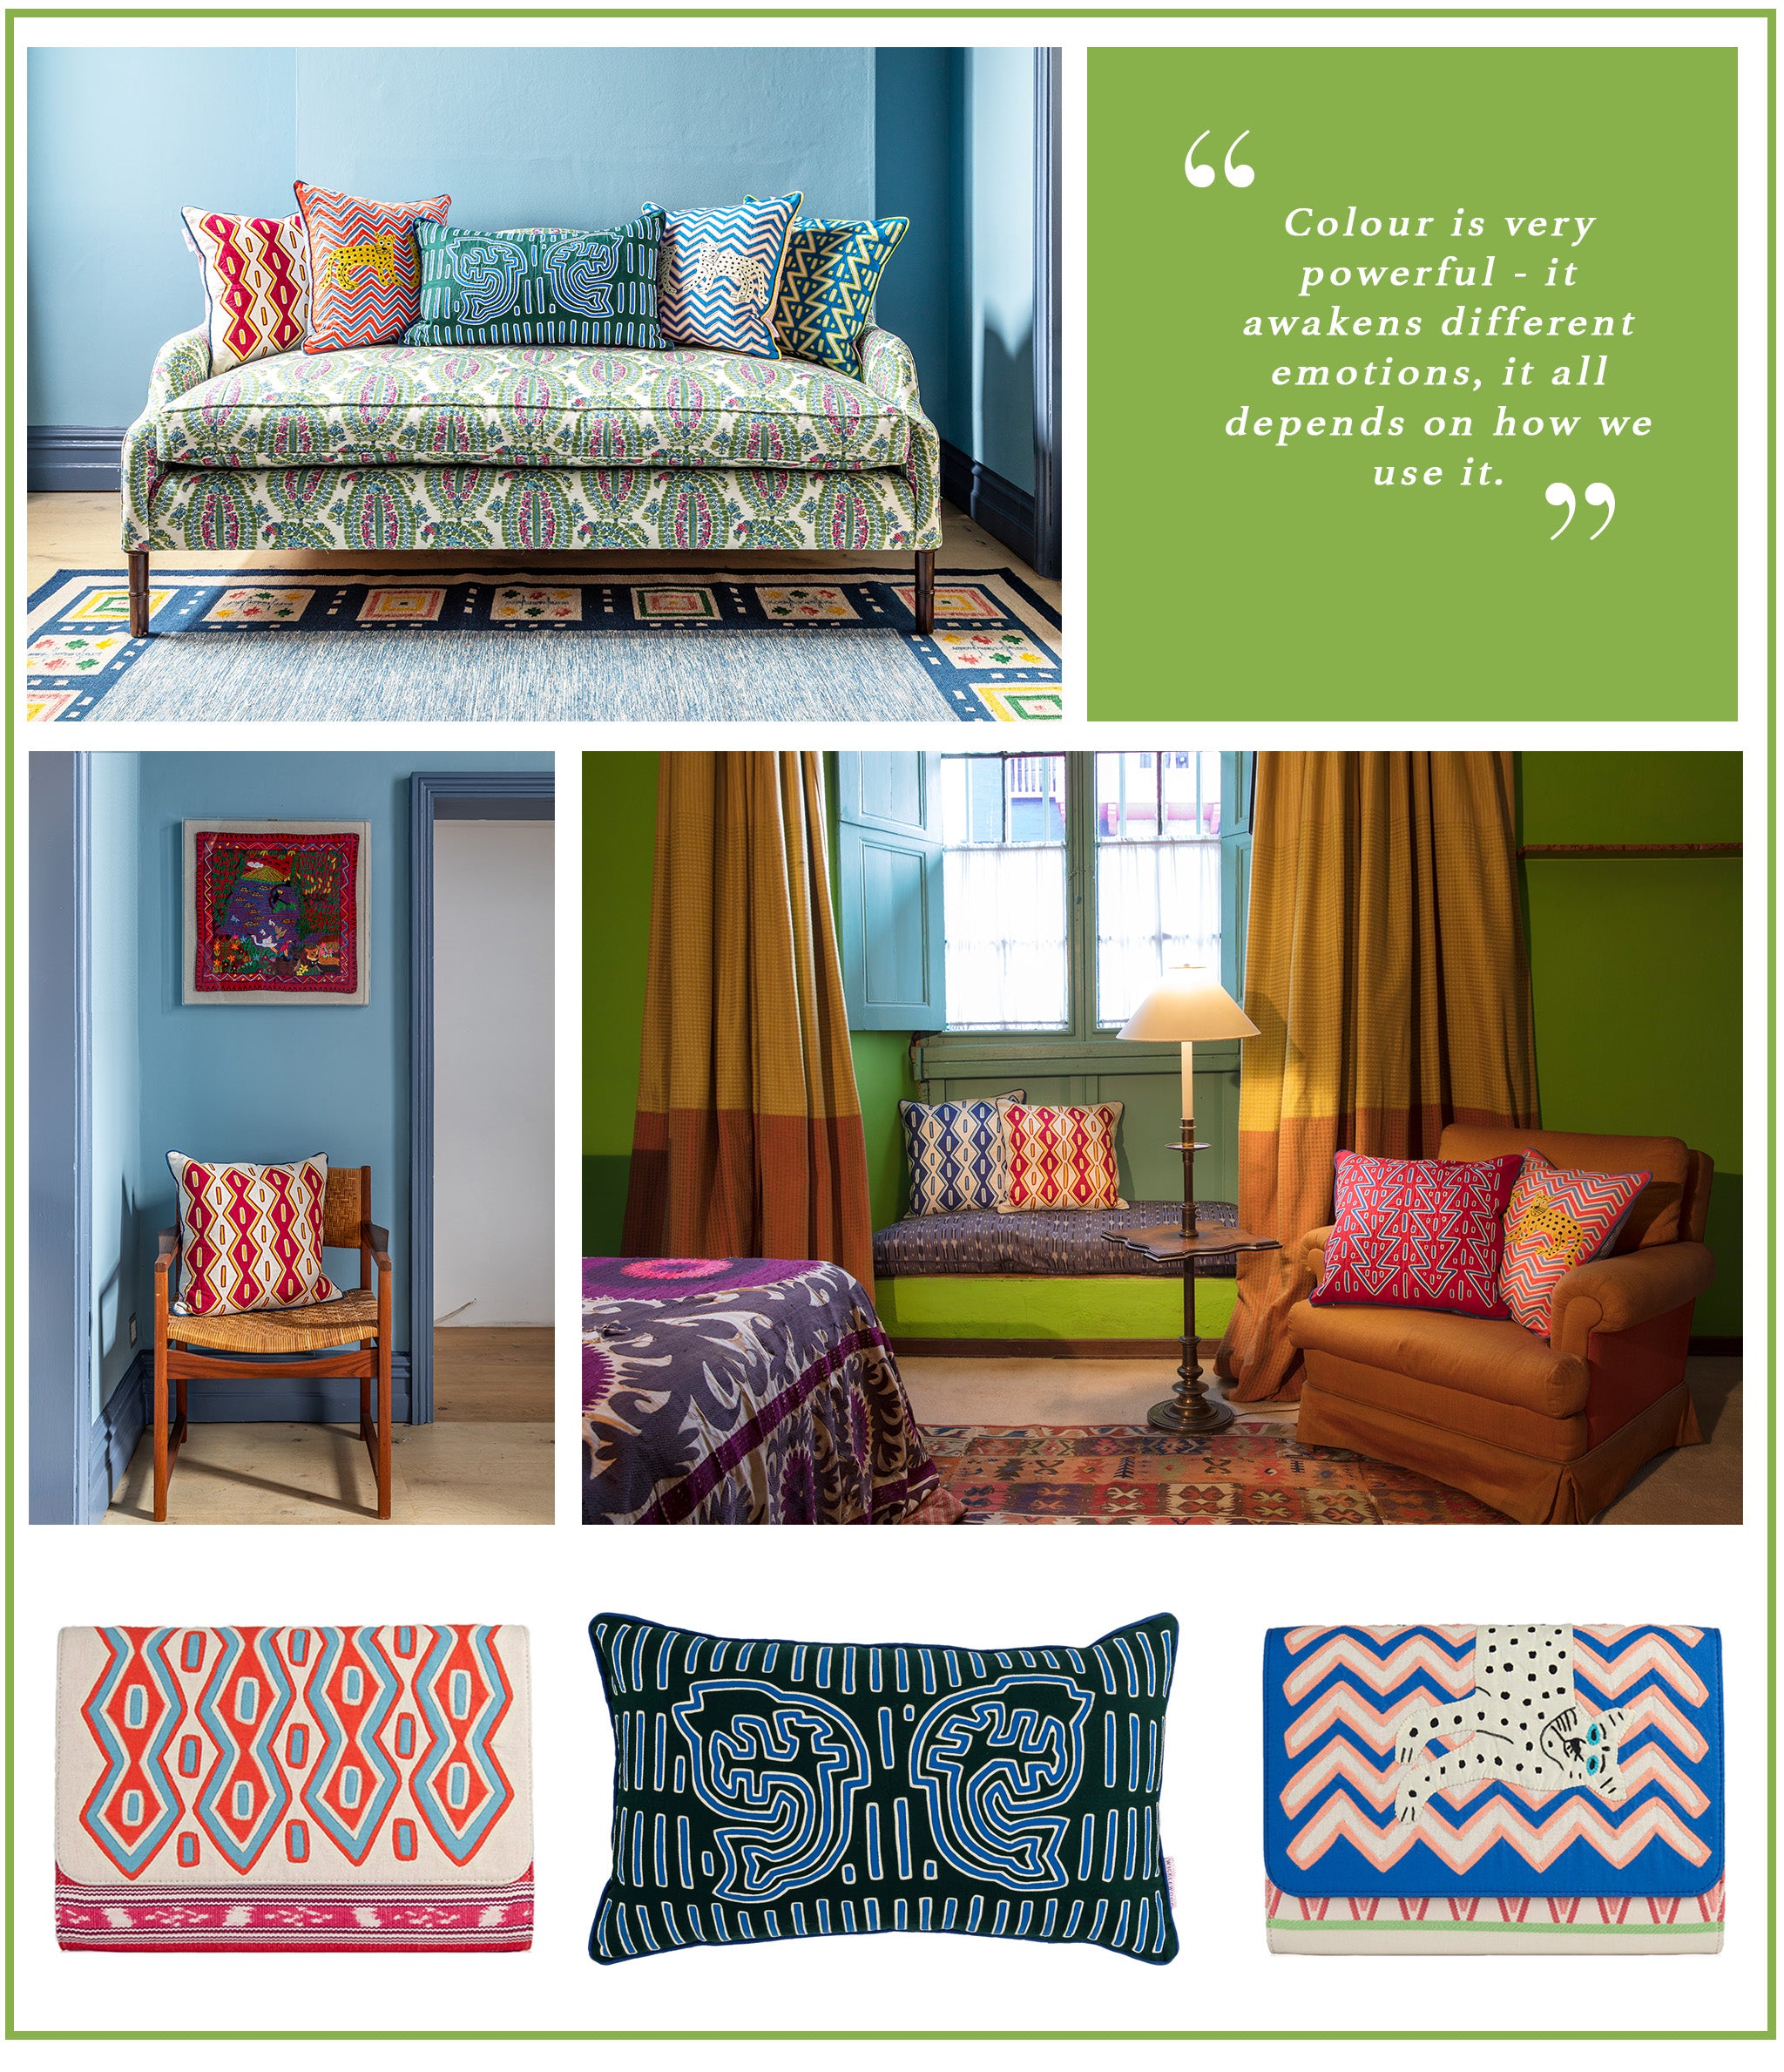 Wicklewood X Mola Sasa range of colourful cushions crafted from Kuna Textiles made in collaboration with the Guna Dule community